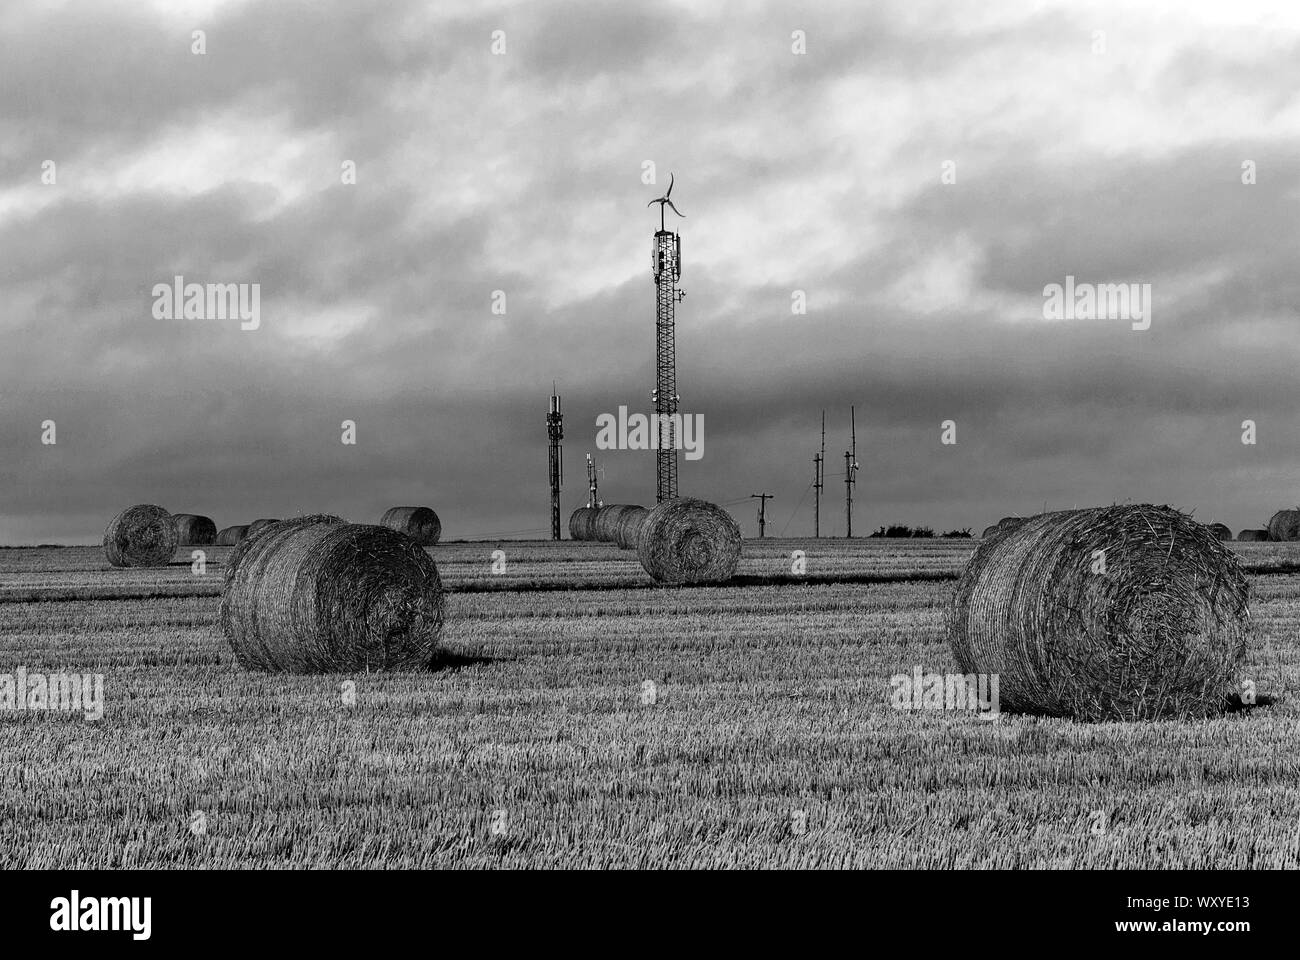 Harvesting. Hay bales in a field under a blue sky. Kinsale. County Cork, Ireland. Countryside natural landscape. Grain crop. Wheat yellow golden harve Stock Photo